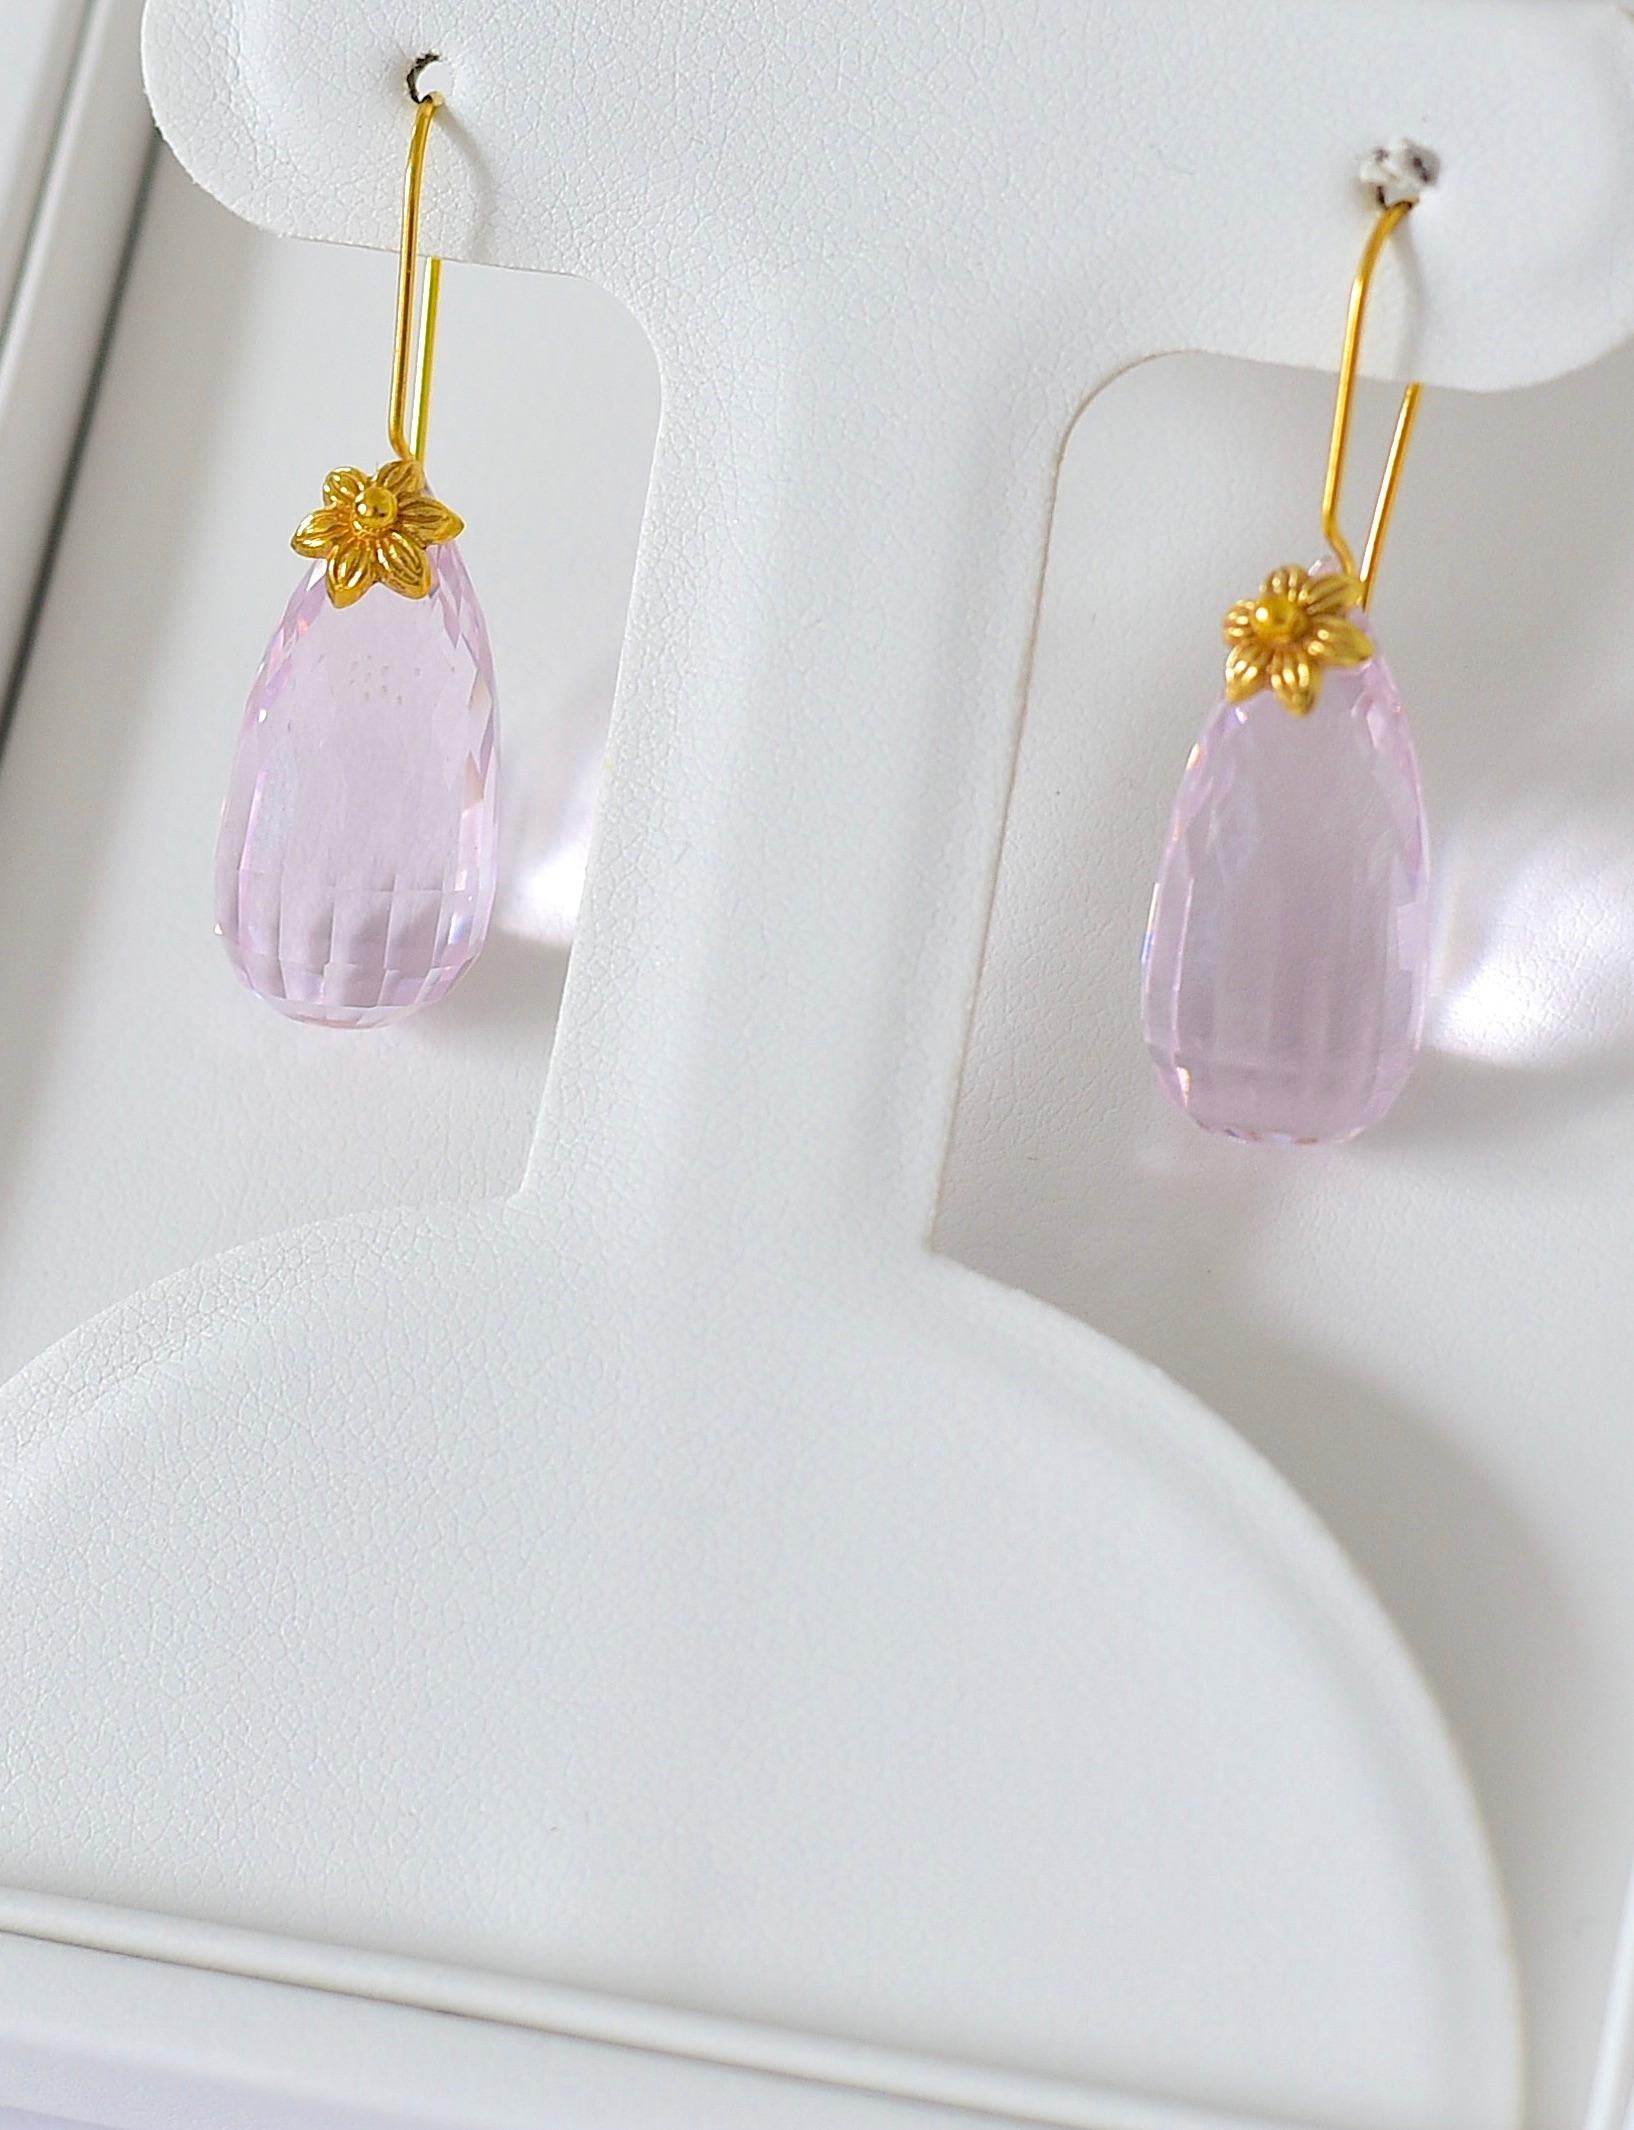 These wonderfully iridescent earrings are small but amazing! 18K solid Yellow Gold earring mounts are elegant, shiny, and timeless. the good price is just a bonus! Lovely soft pink color.

Lab created Pink Kunzite (19mm x 11mm)
18K Solid Yellow